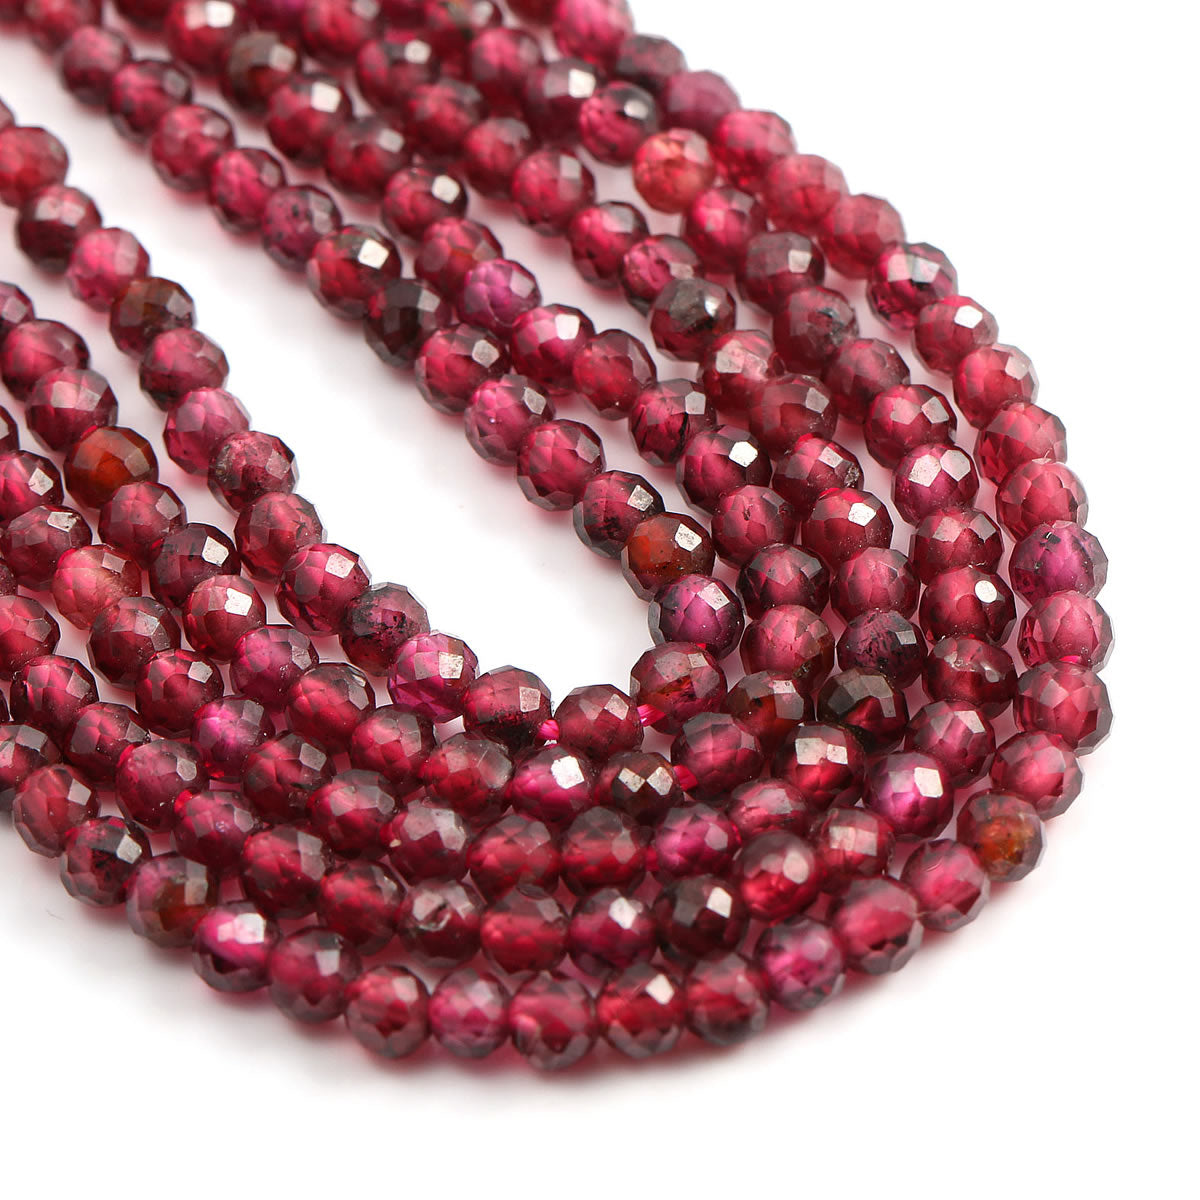 Round Shape Garnet Faceted Beads Natural Stone Beads Making for Jewelry DIY Bracelet Necklace 2 3 4 5 mm